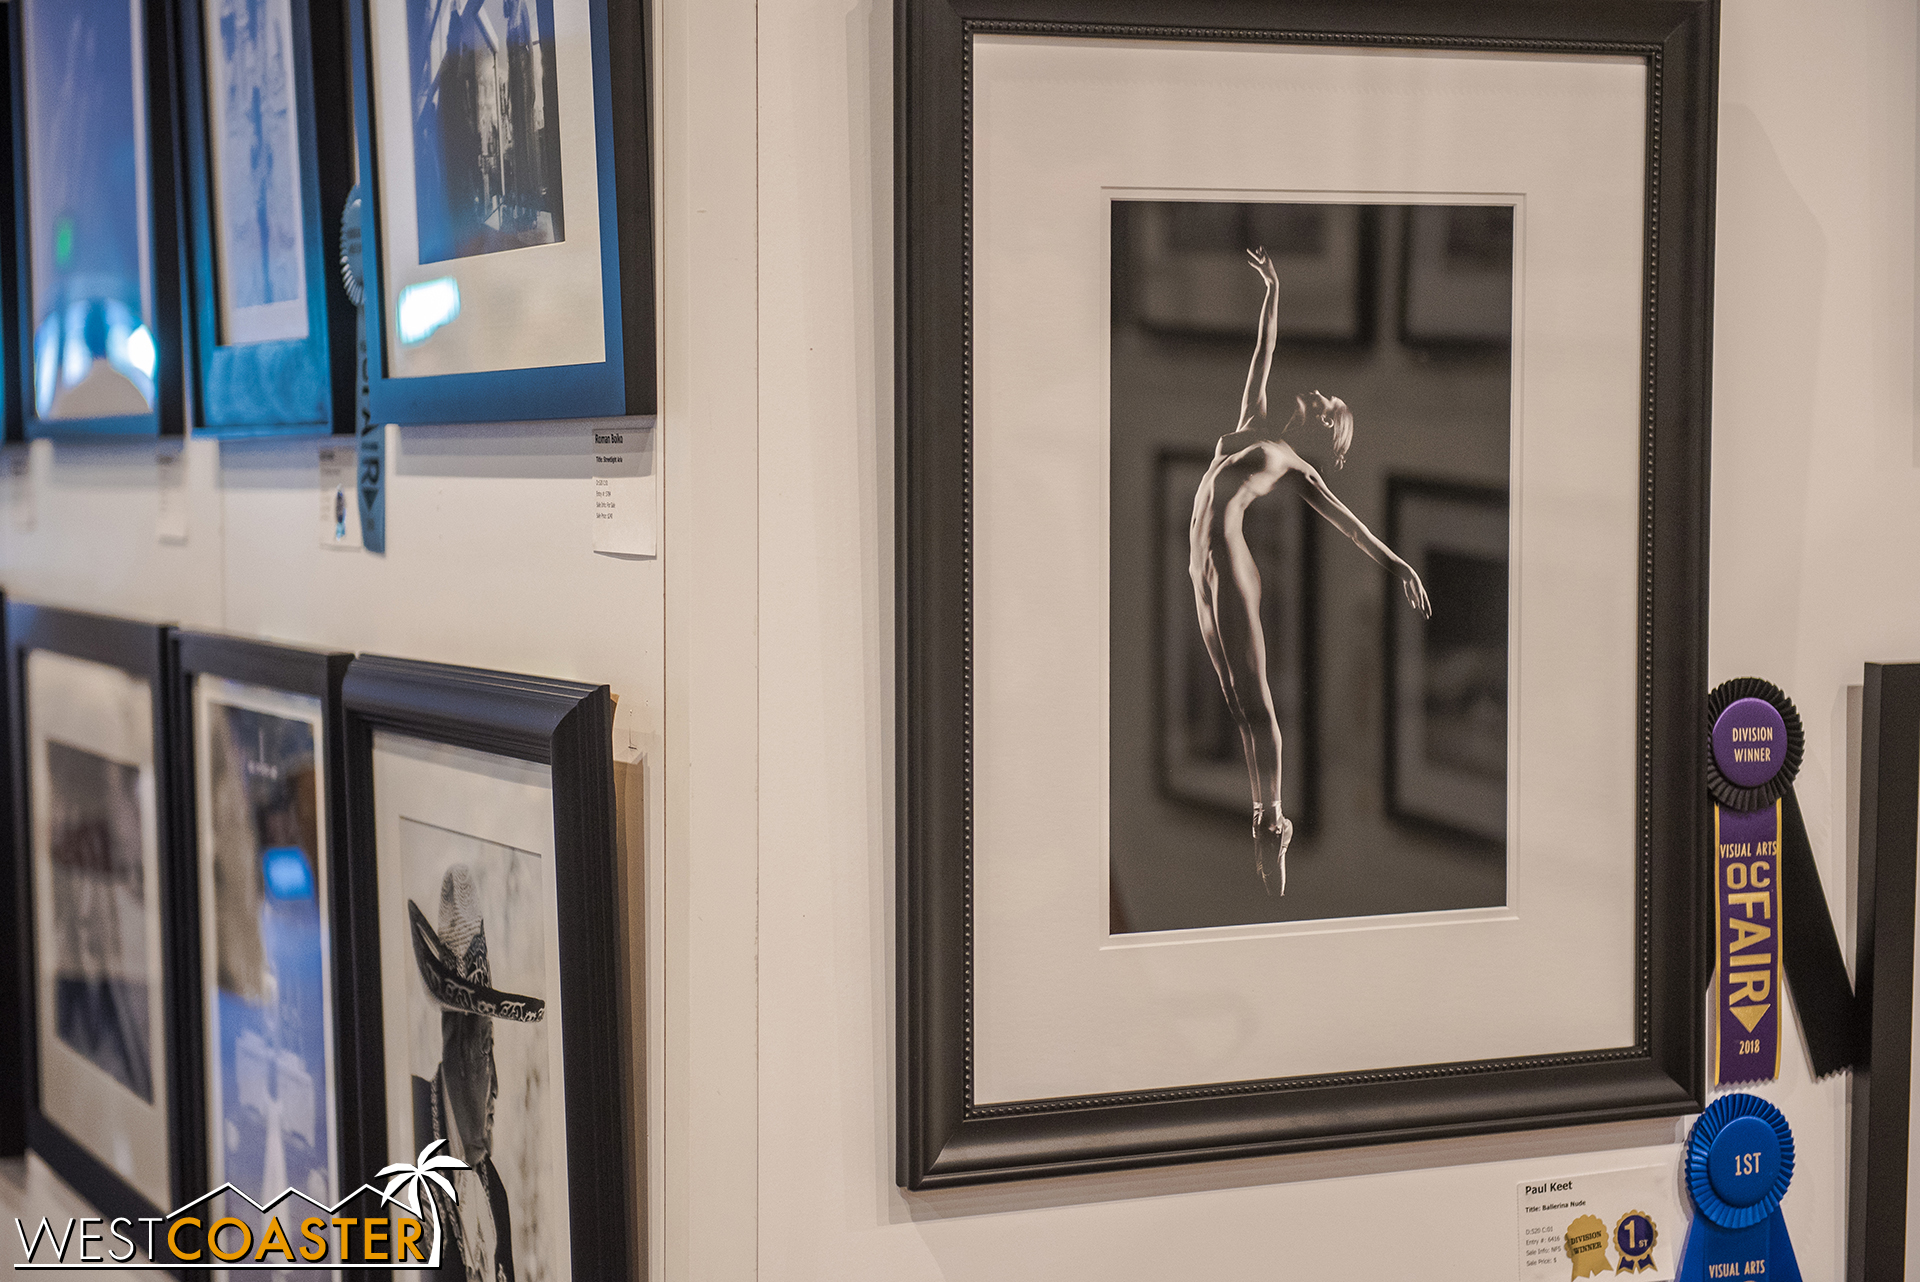  It’s rare to see nudes on display, but this photo was award winning (and compositionally pretty amazing), so it made it through the filters. 